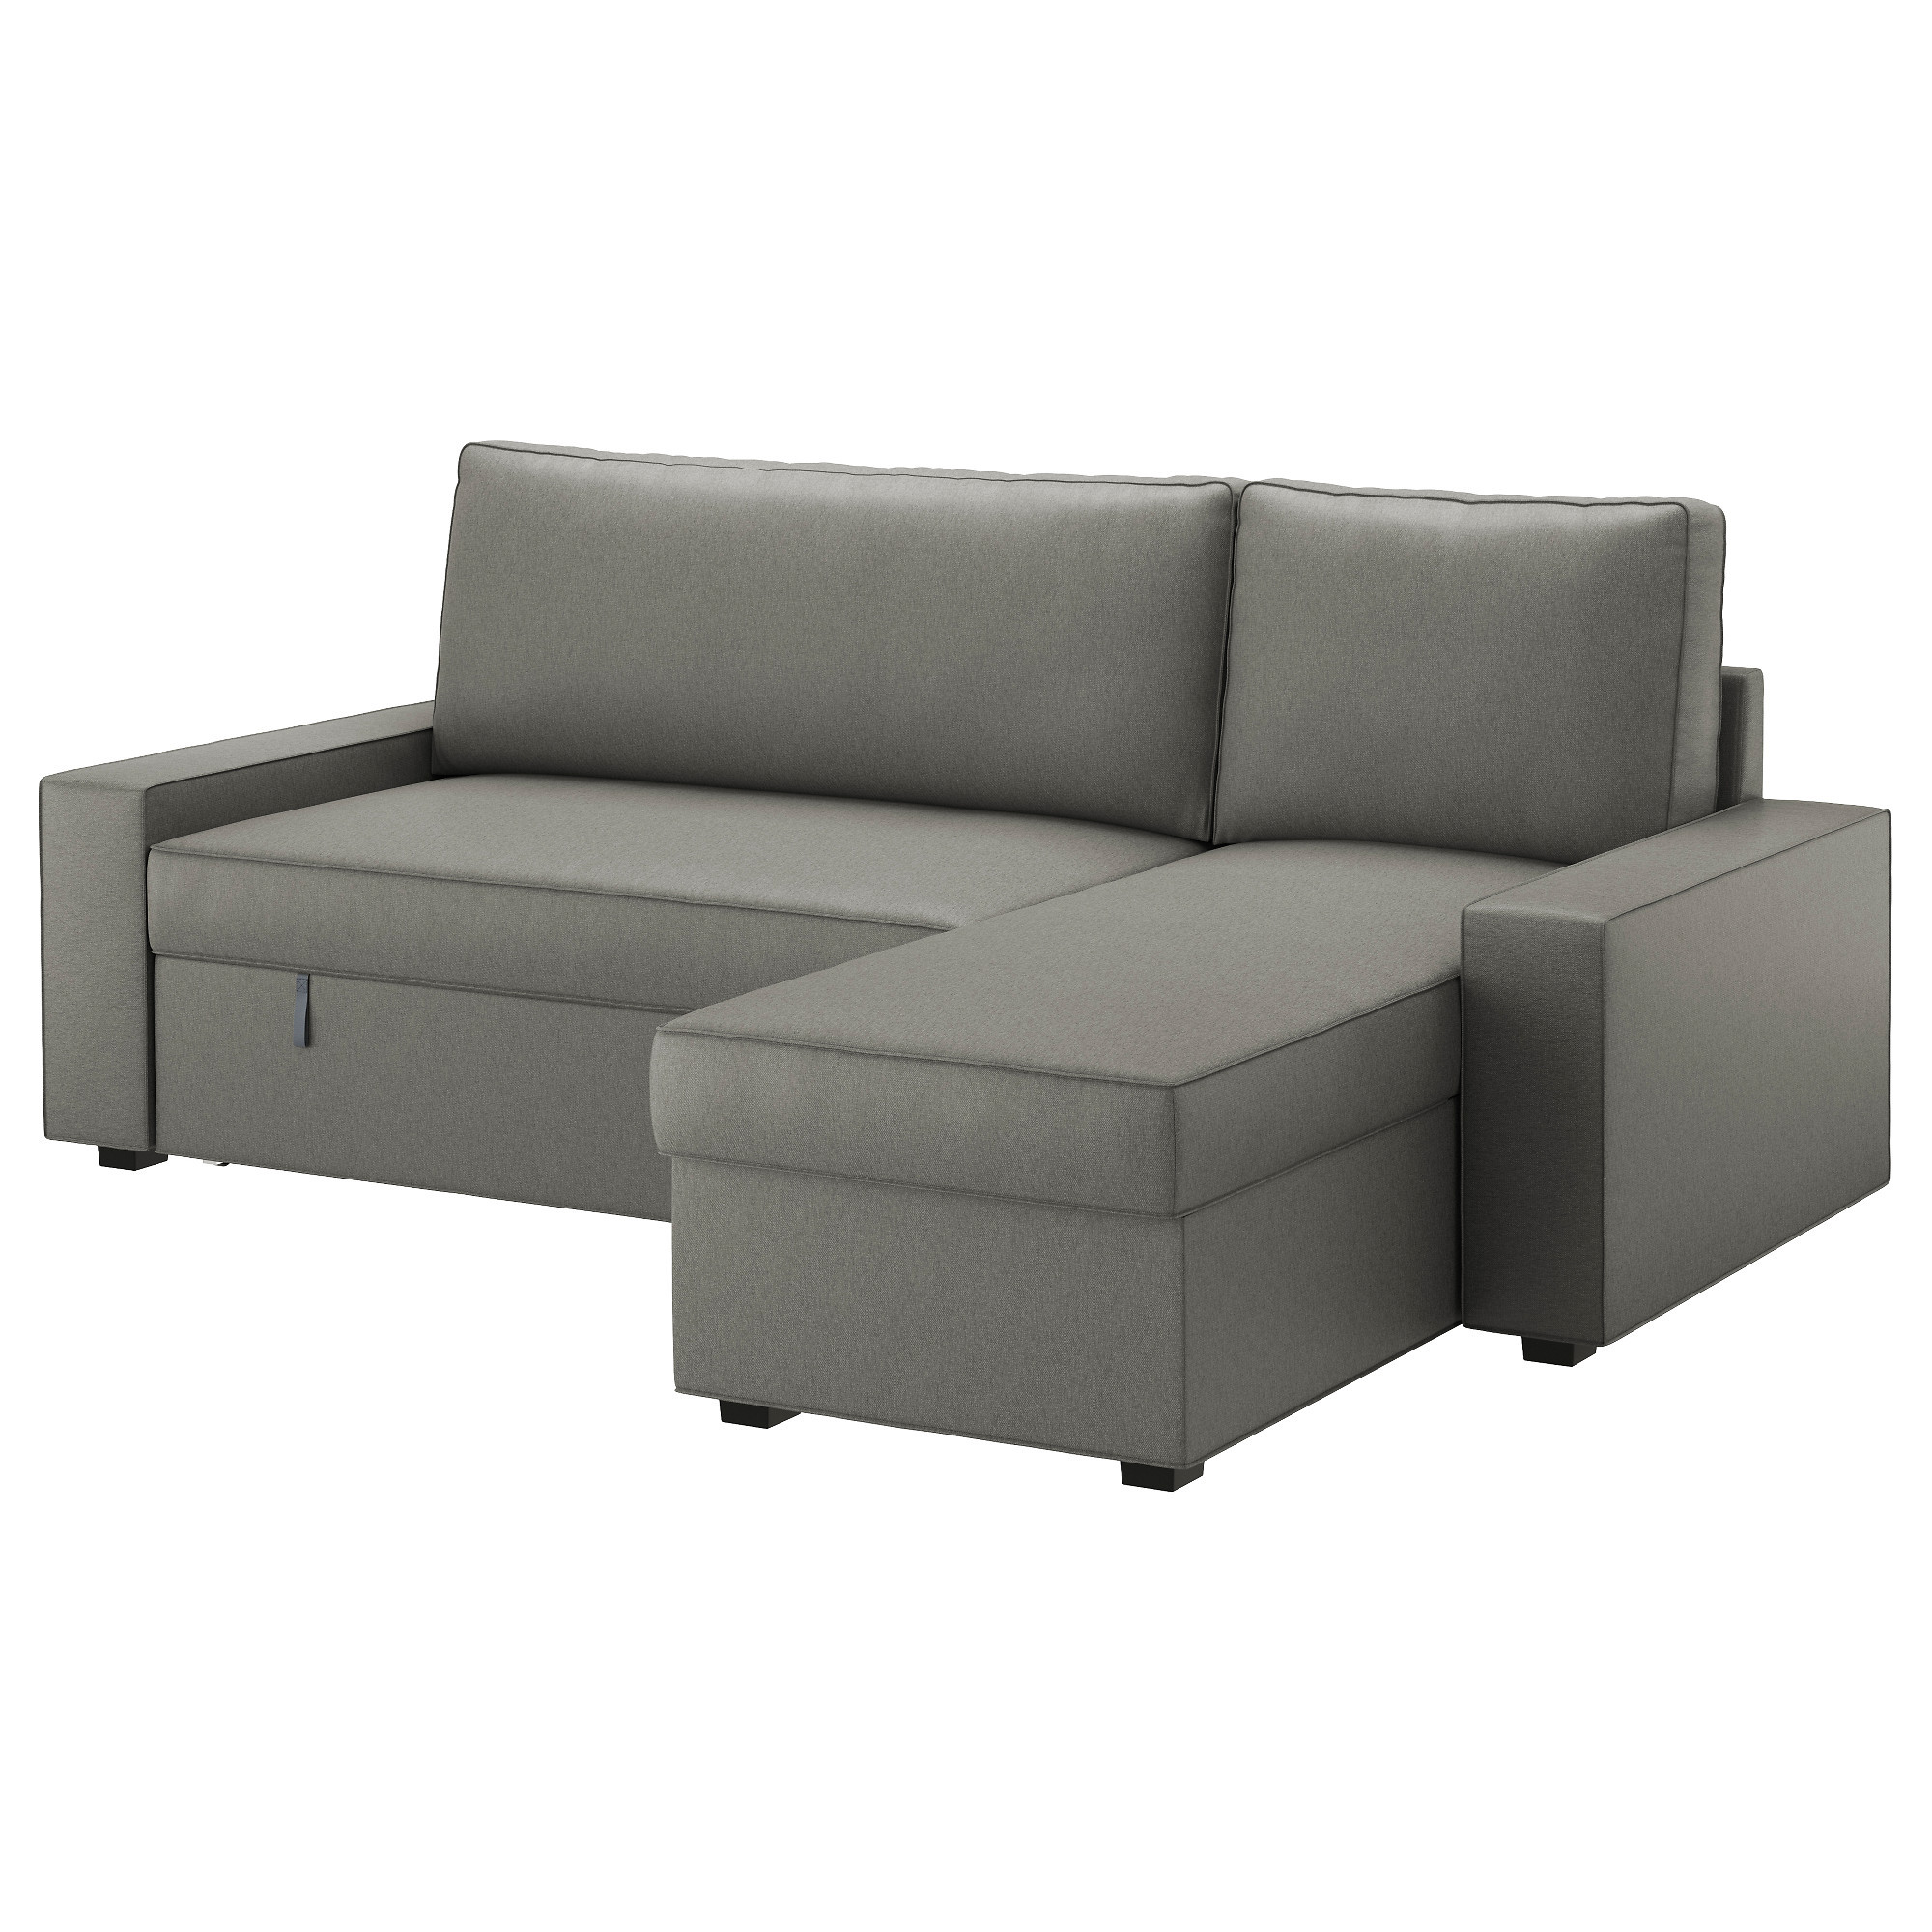 Schlafcouch Ikea
 Corner Sofa Beds Futons & Chair Beds